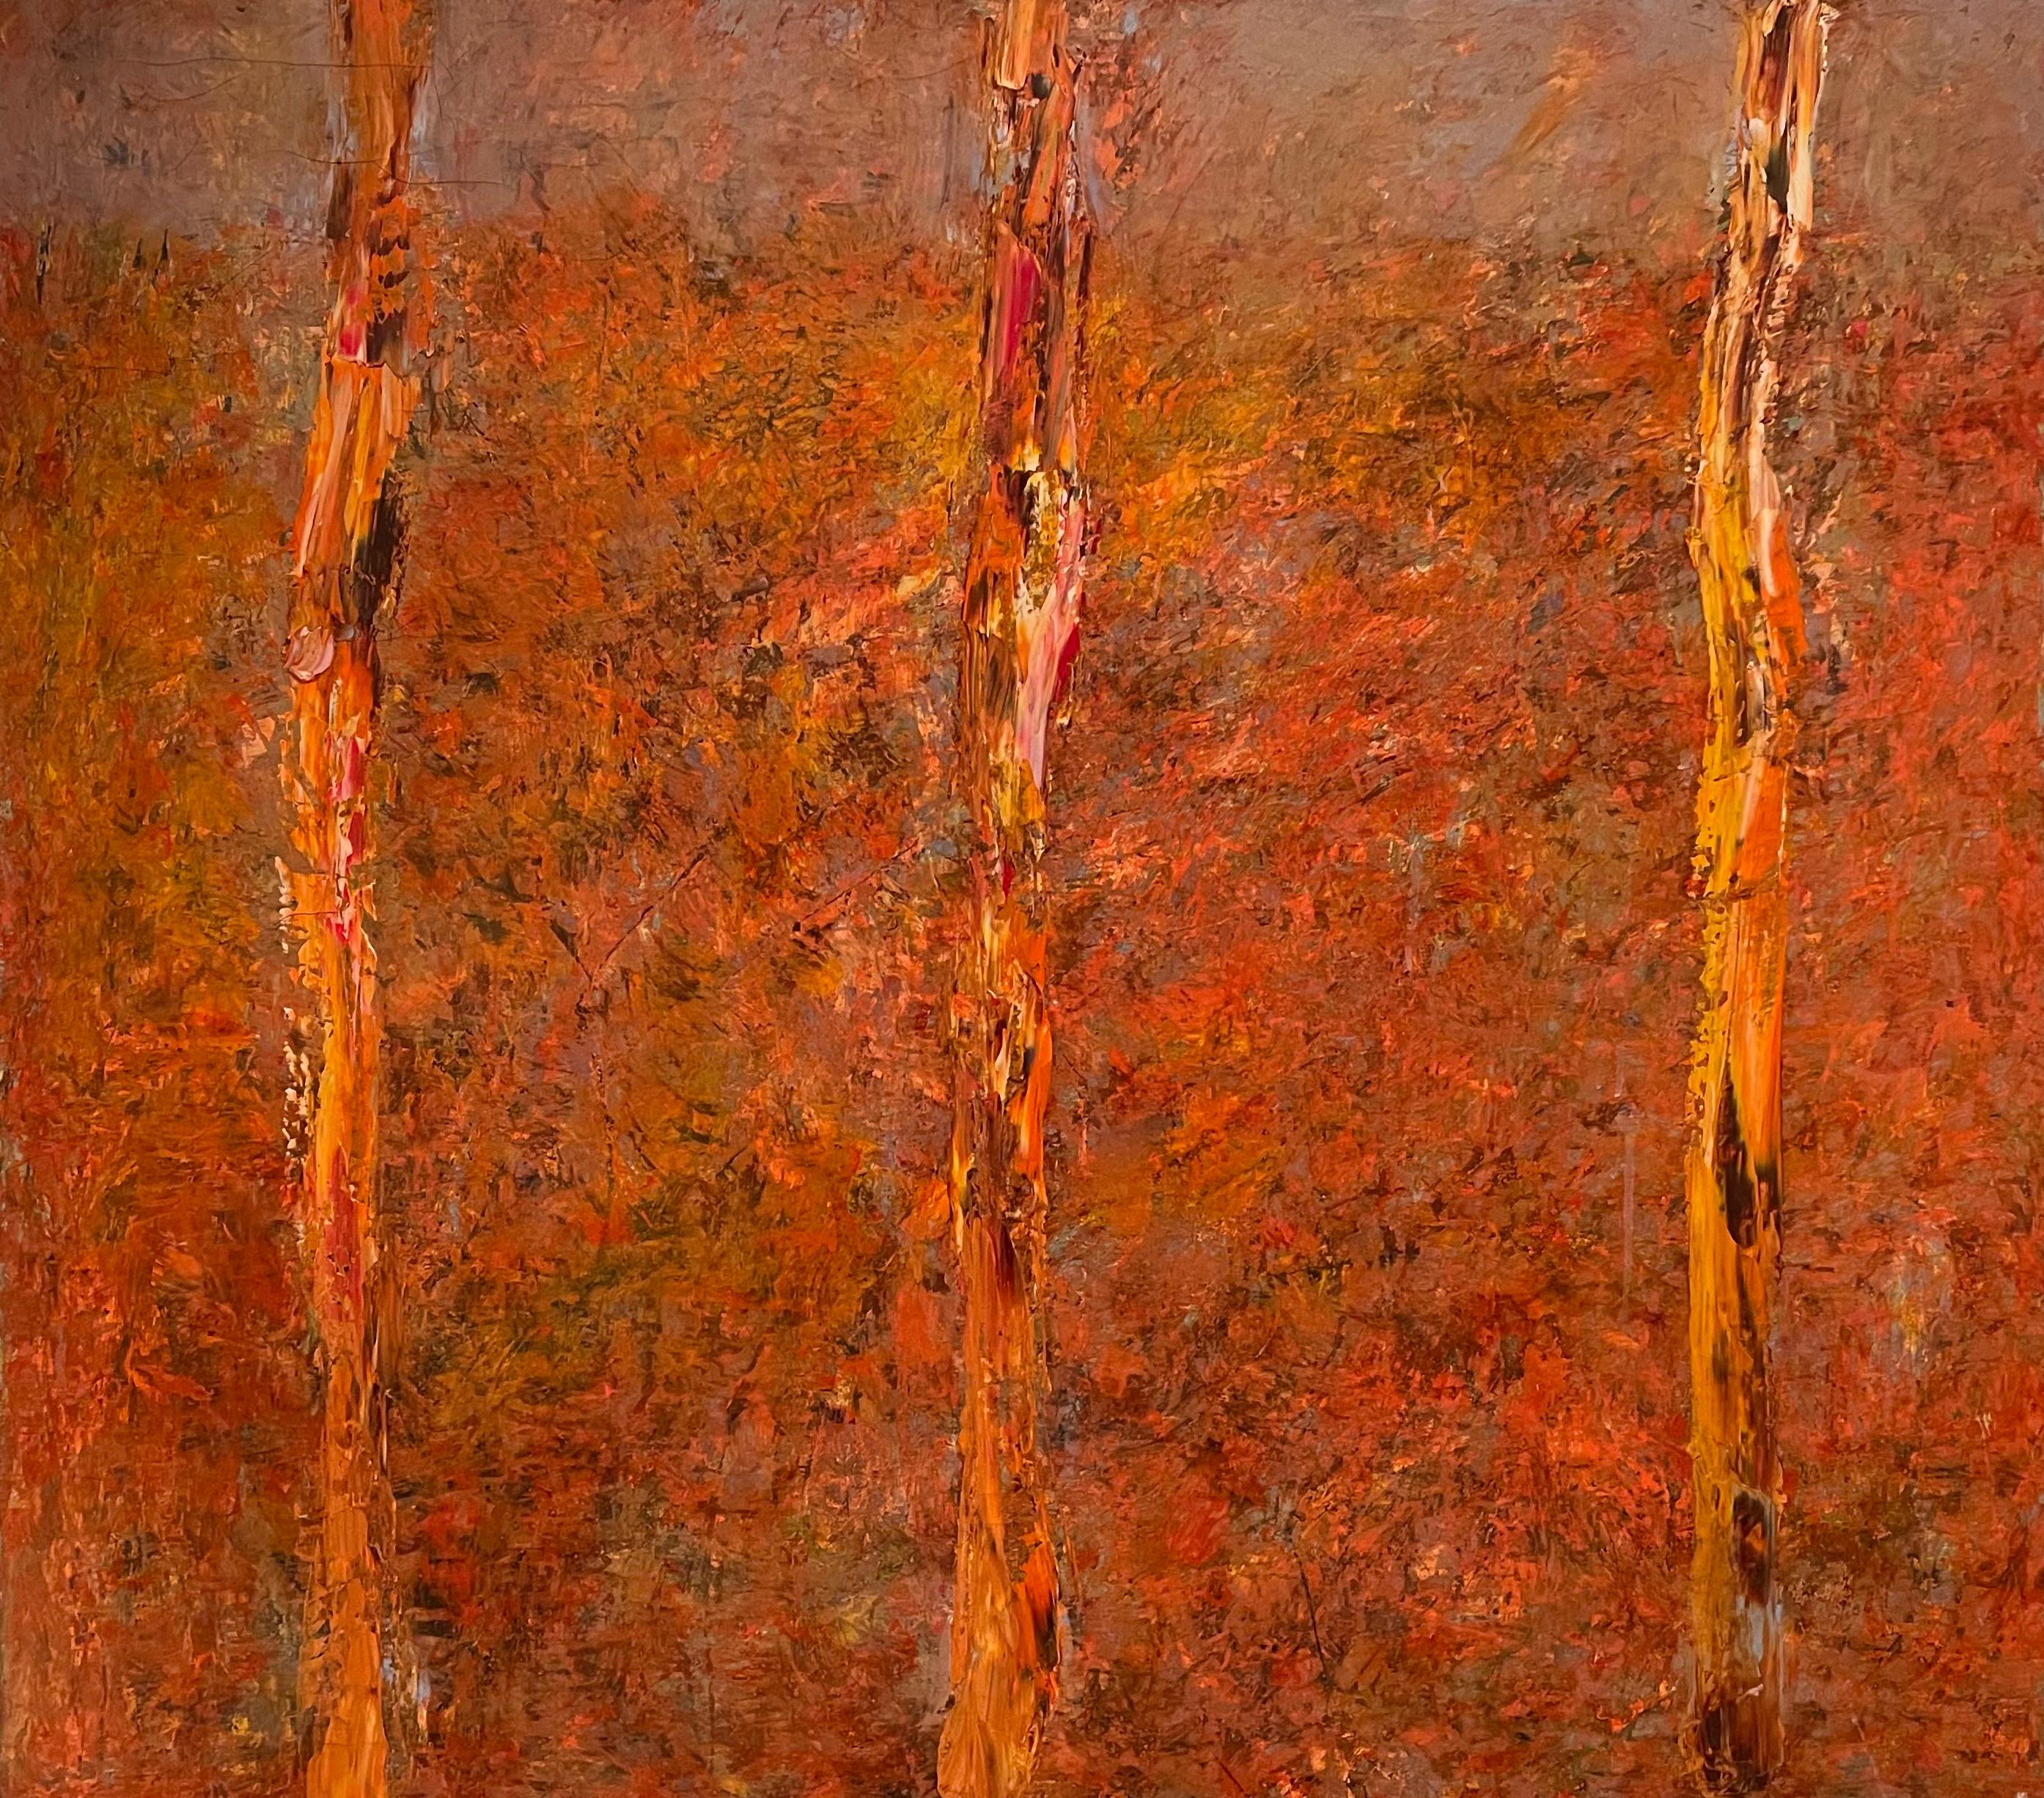 David Leviathan Abstract Painting - "Trunks" Orange Contemporary Expressionist Landscape Abstract by Leviathan 